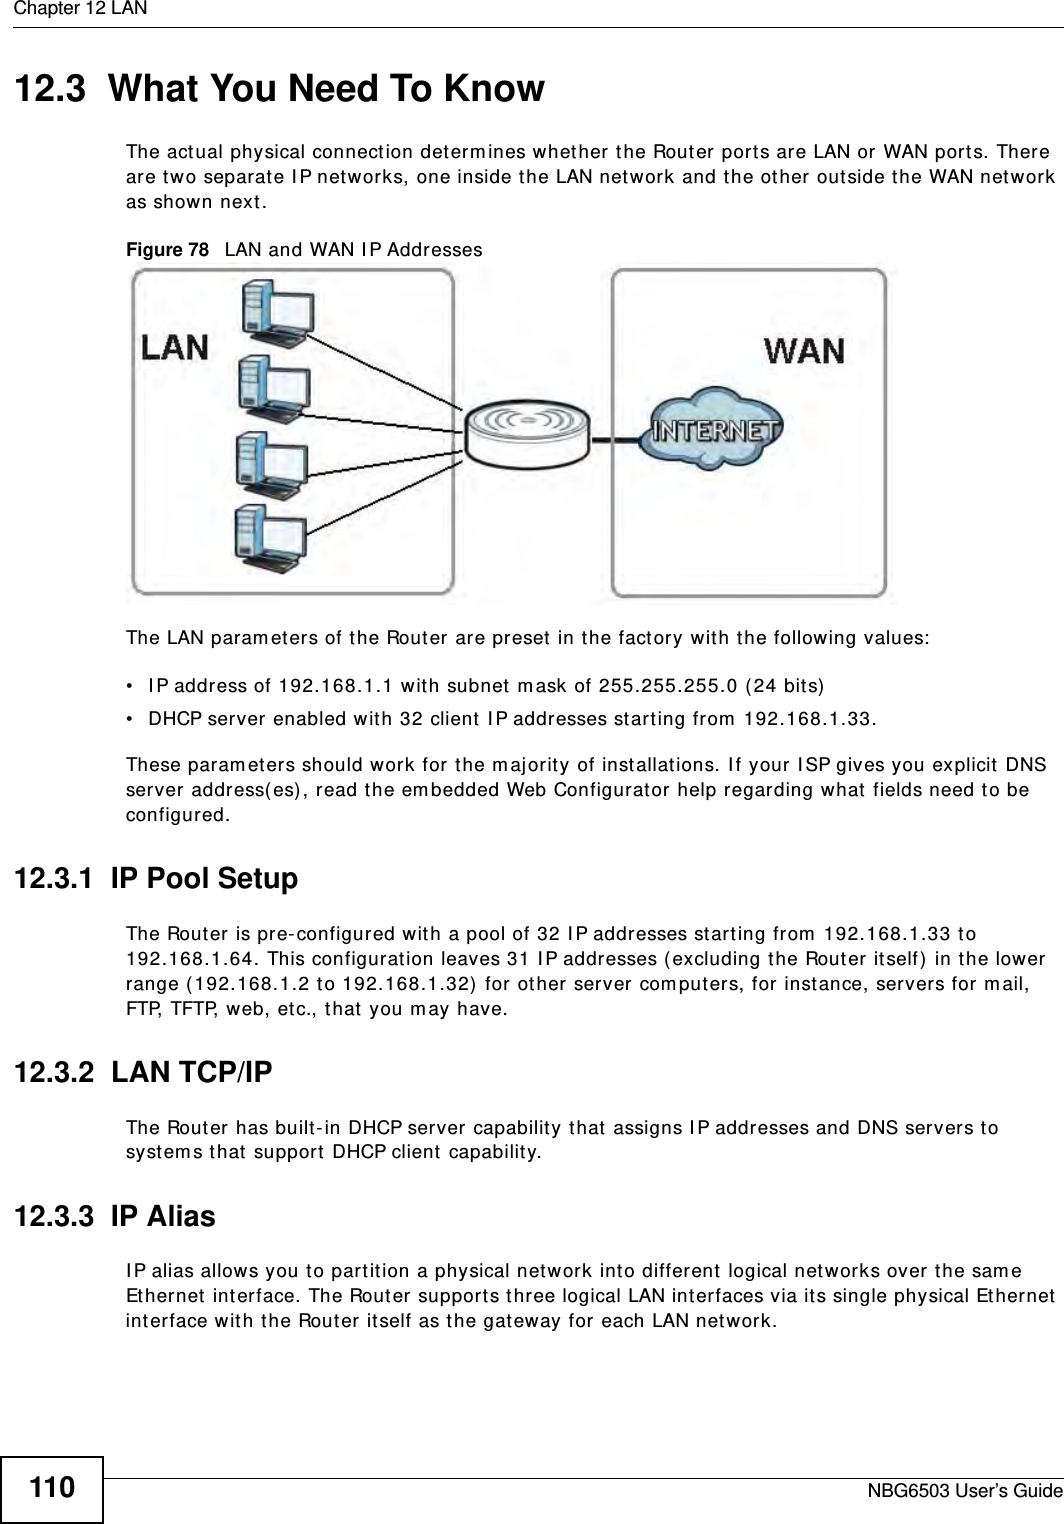 Chapter 12 LANNBG6503 User’s Guide11012.3  What You Need To KnowThe actual physical connection determines whether the Router ports are LAN or WAN ports. There are two separate IP networks, one inside the LAN network and the other outside the WAN network as shown next.Figure 78   LAN and WAN IP AddressesThe LAN parameters of the Router are preset in the factory with the following values:• IP address of 192.168.1.1 with subnet mask of 255.255.255.0 (24 bits)• DHCP server enabled with 32 client IP addresses starting from 192.168.1.33. These parameters should work for the majority of installations. If your ISP gives you explicit DNS server address(es), read the embedded Web Configurator help regarding what fields need to be configured.12.3.1  IP Pool SetupThe Router is pre-configured with a pool of 32 IP addresses starting from 192.168.1.33 to 192.168.1.64. This configuration leaves 31 IP addresses (excluding the Router itself) in the lower range (192.168.1.2 to 192.168.1.32) for other server computers, for instance, servers for mail, FTP, TFTP, web, etc., that you may have.12.3.2  LAN TCP/IP The Router has built-in DHCP server capability that assigns IP addresses and DNS servers to systems that support DHCP client capability.12.3.3  IP AliasIP alias allows you to partition a physical network into different logical networks over the same Ethernet interface. The Router supports three logical LAN interfaces via its single physical Ethernet interface with the Router itself as the gateway for each LAN network.